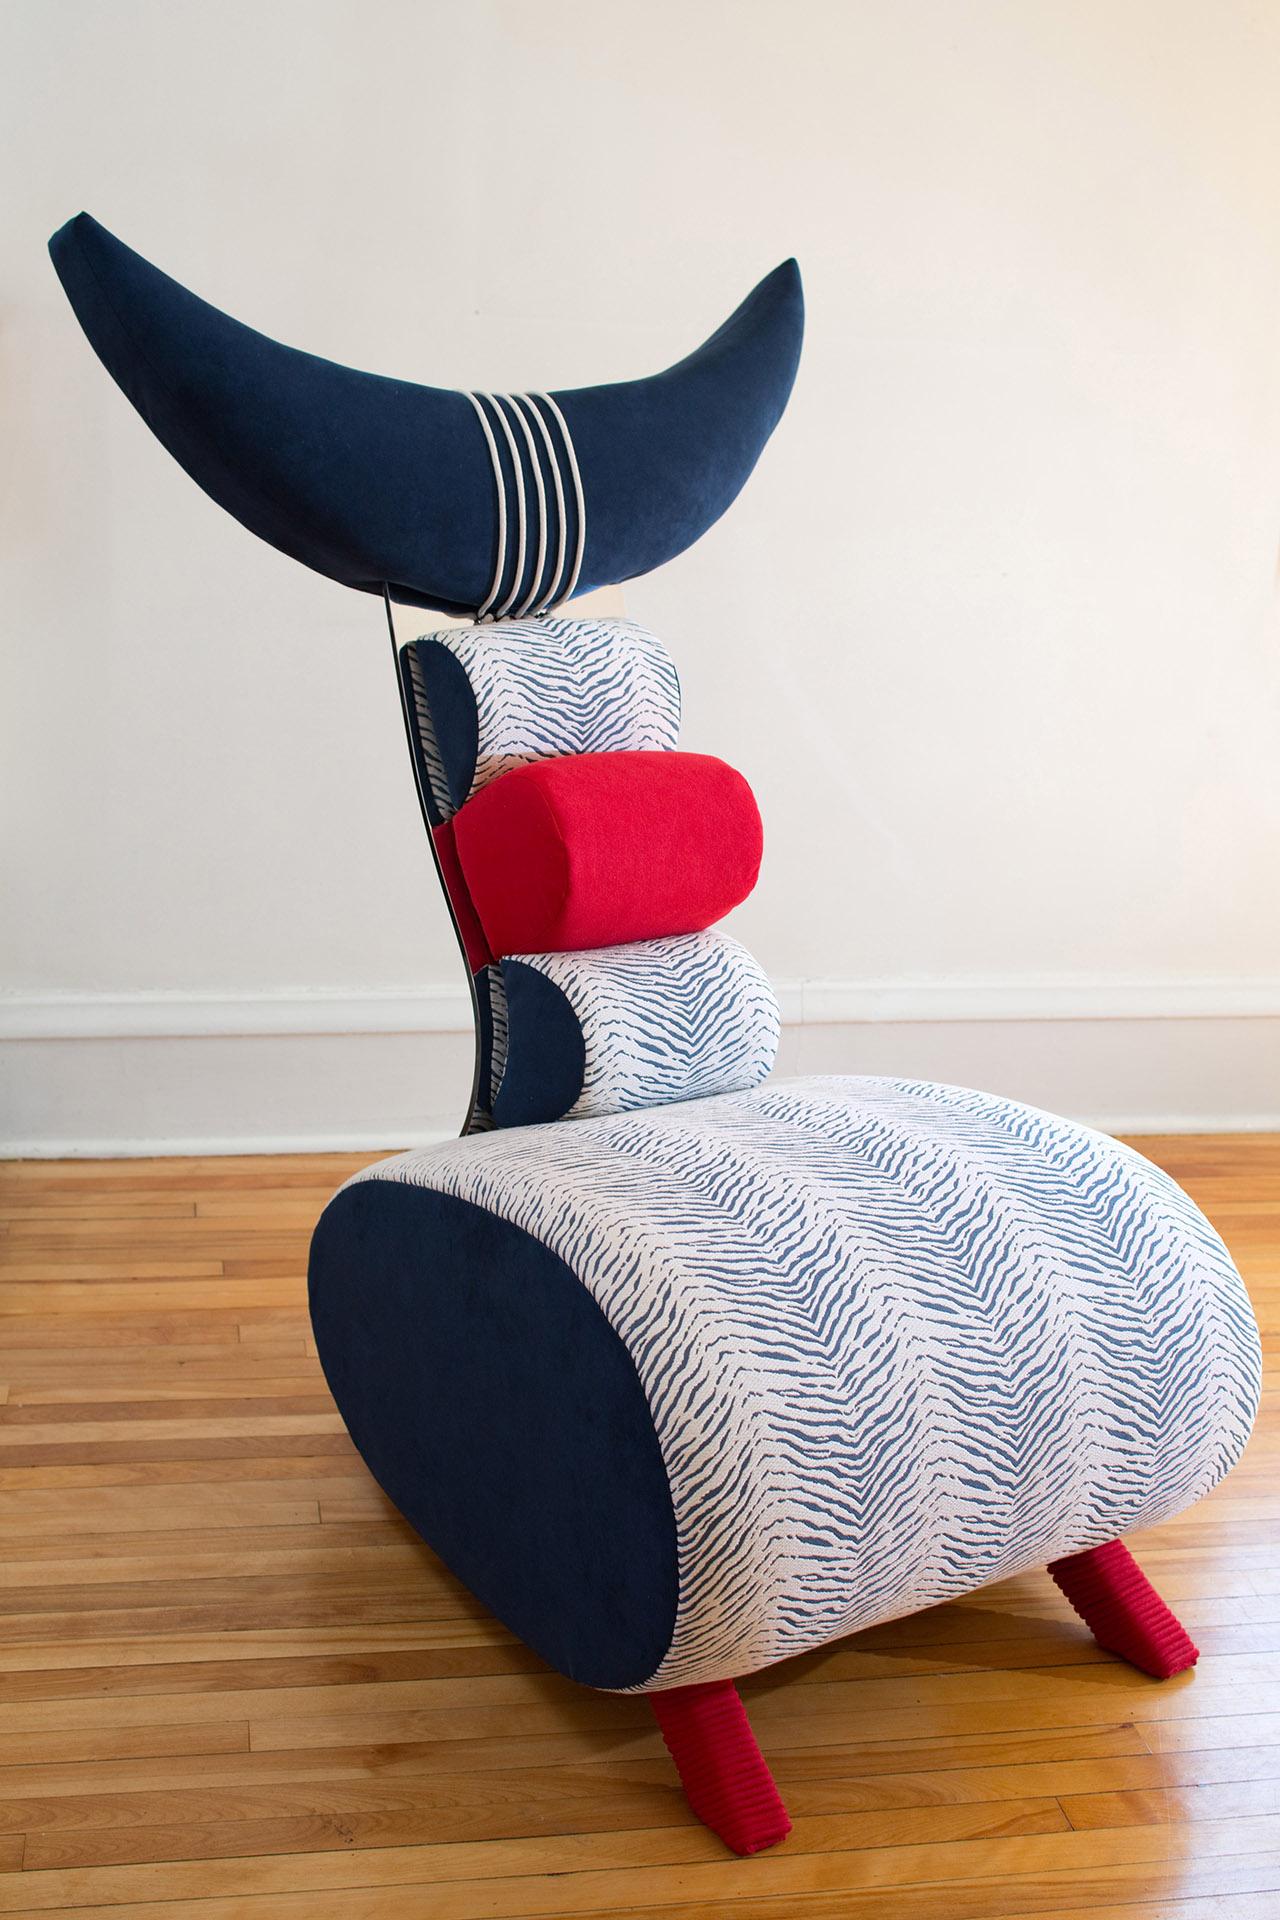 Canadian Contemporary One-of-a-Kind Nathalie Guez “Scorpio” Designer Upholstered Chair  For Sale